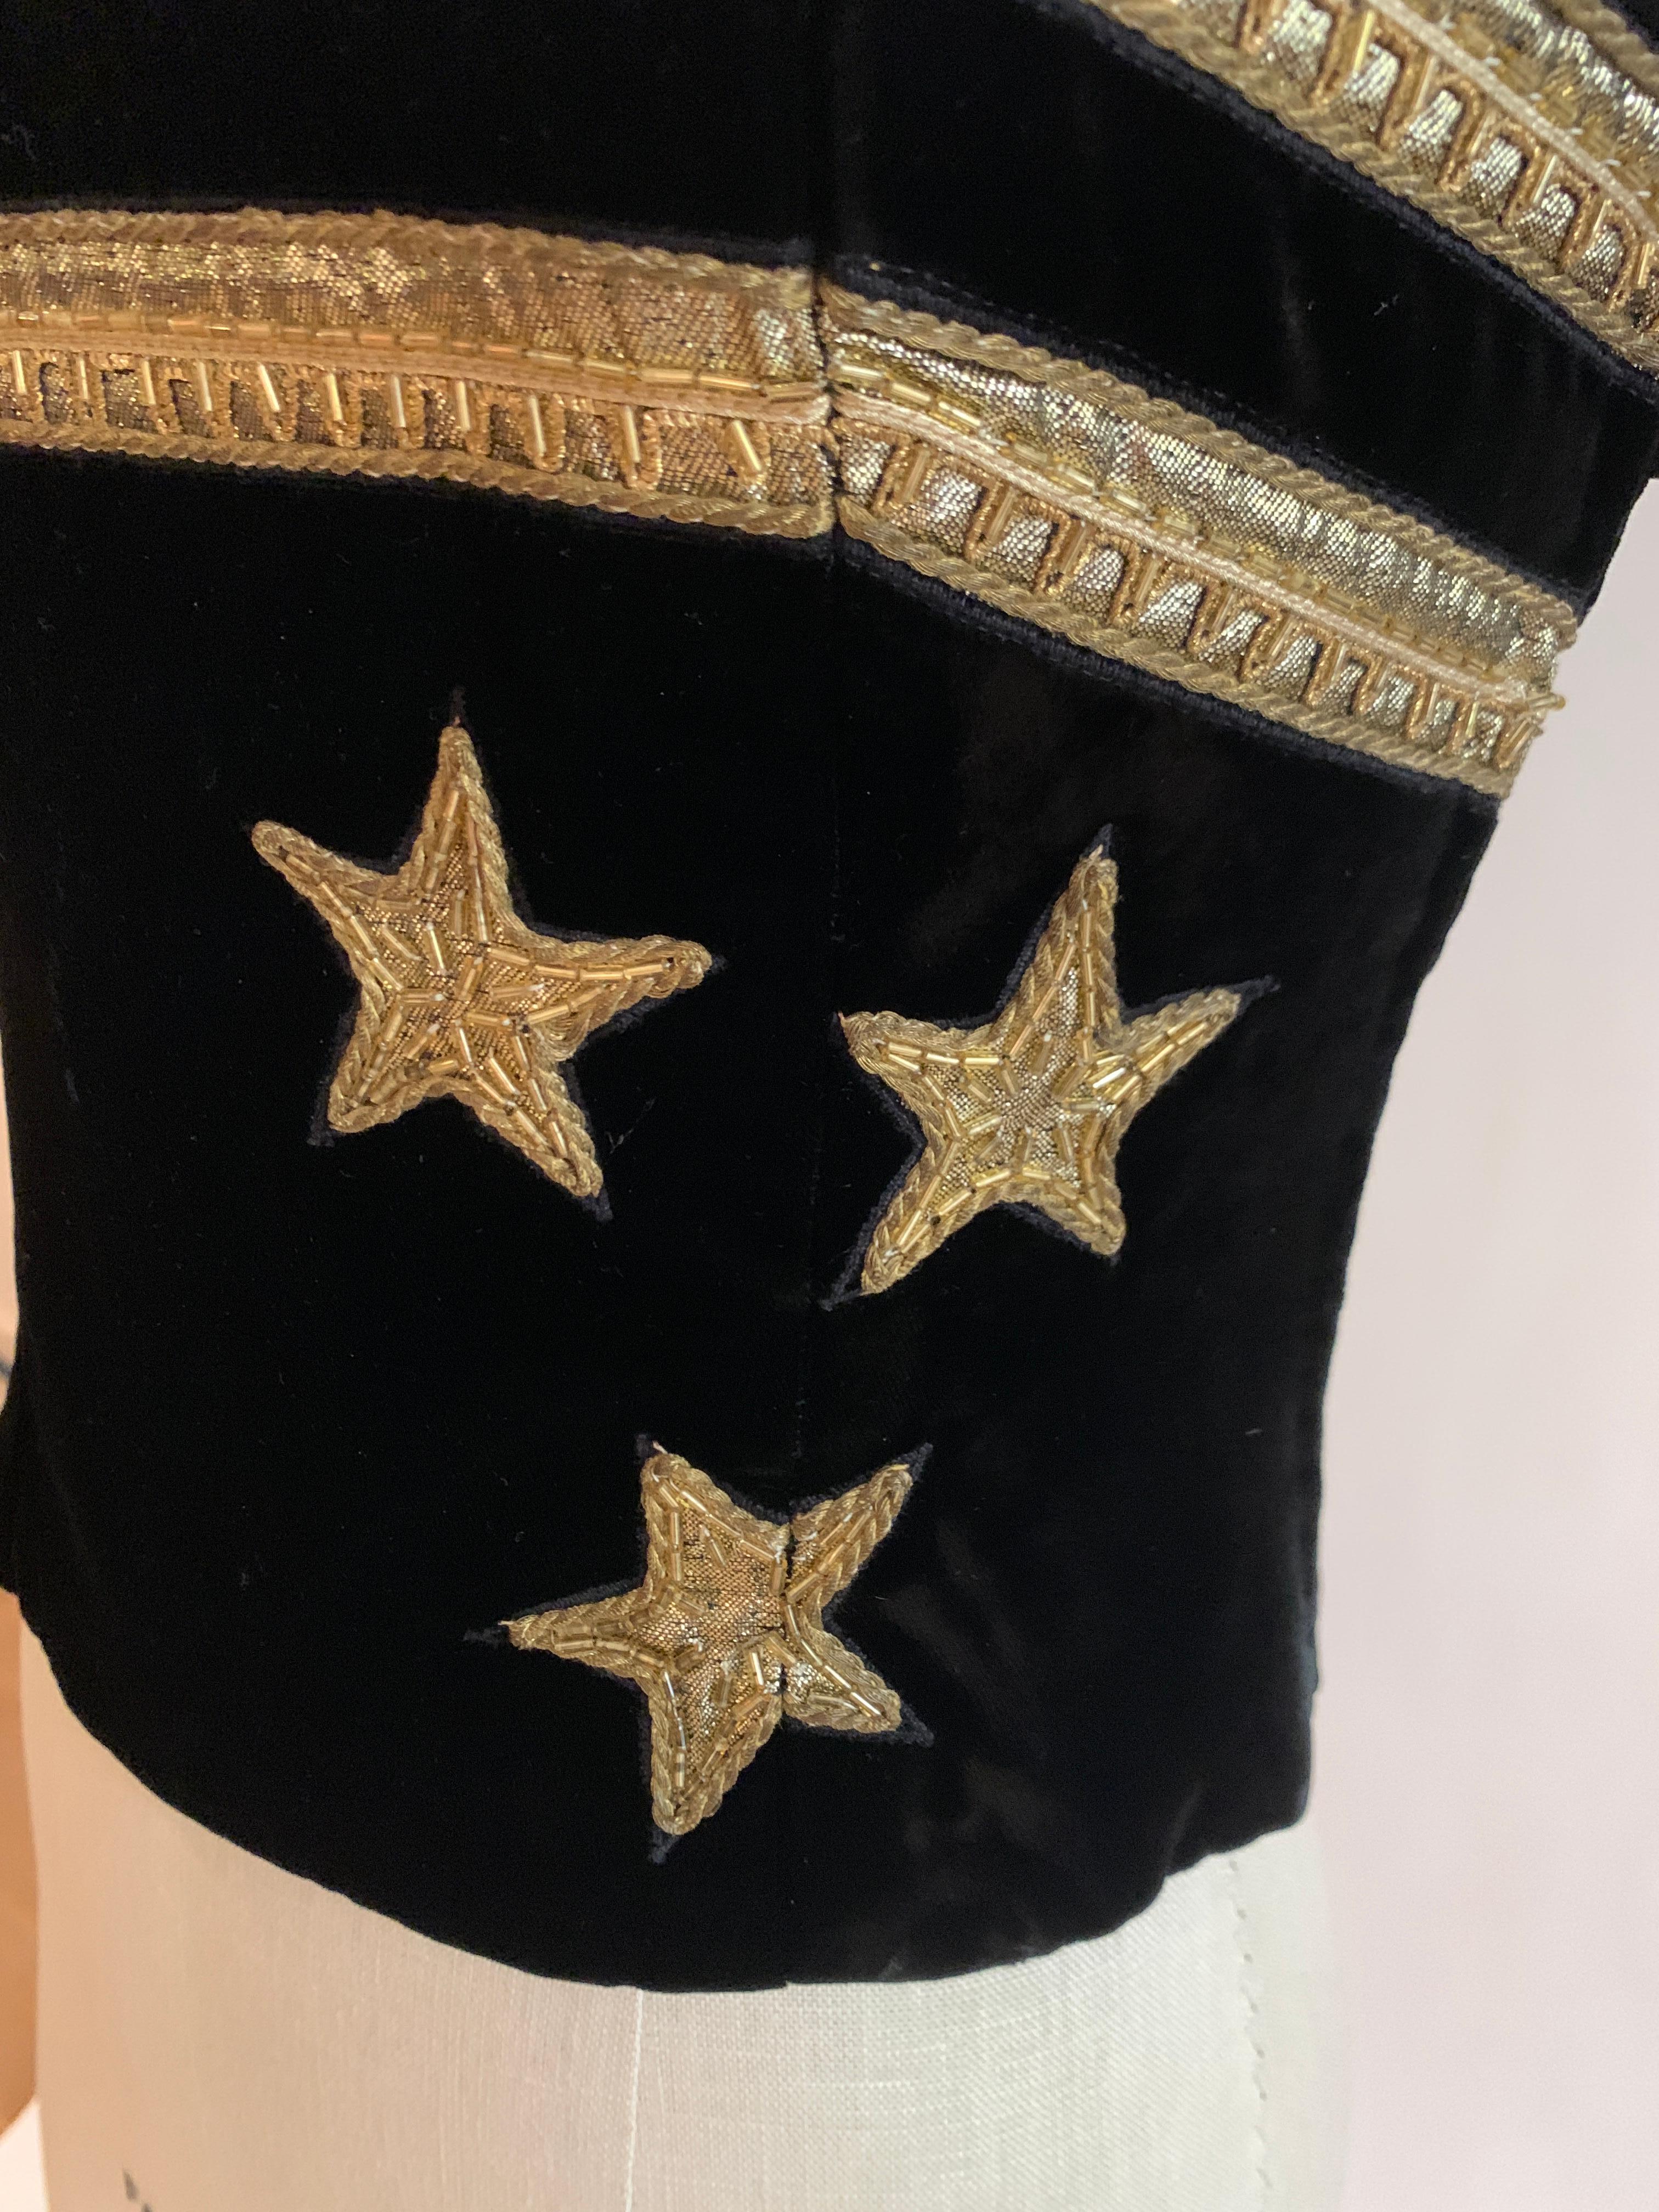 Christian Dior Boutique late 80s/early 90s black velvet corset with gold beaded appliqué star detail and trim at bust. Strapless top closes with side zip and hook and eye. (Photo note: zipper is not zipped all the way up on our mannequin- it is a